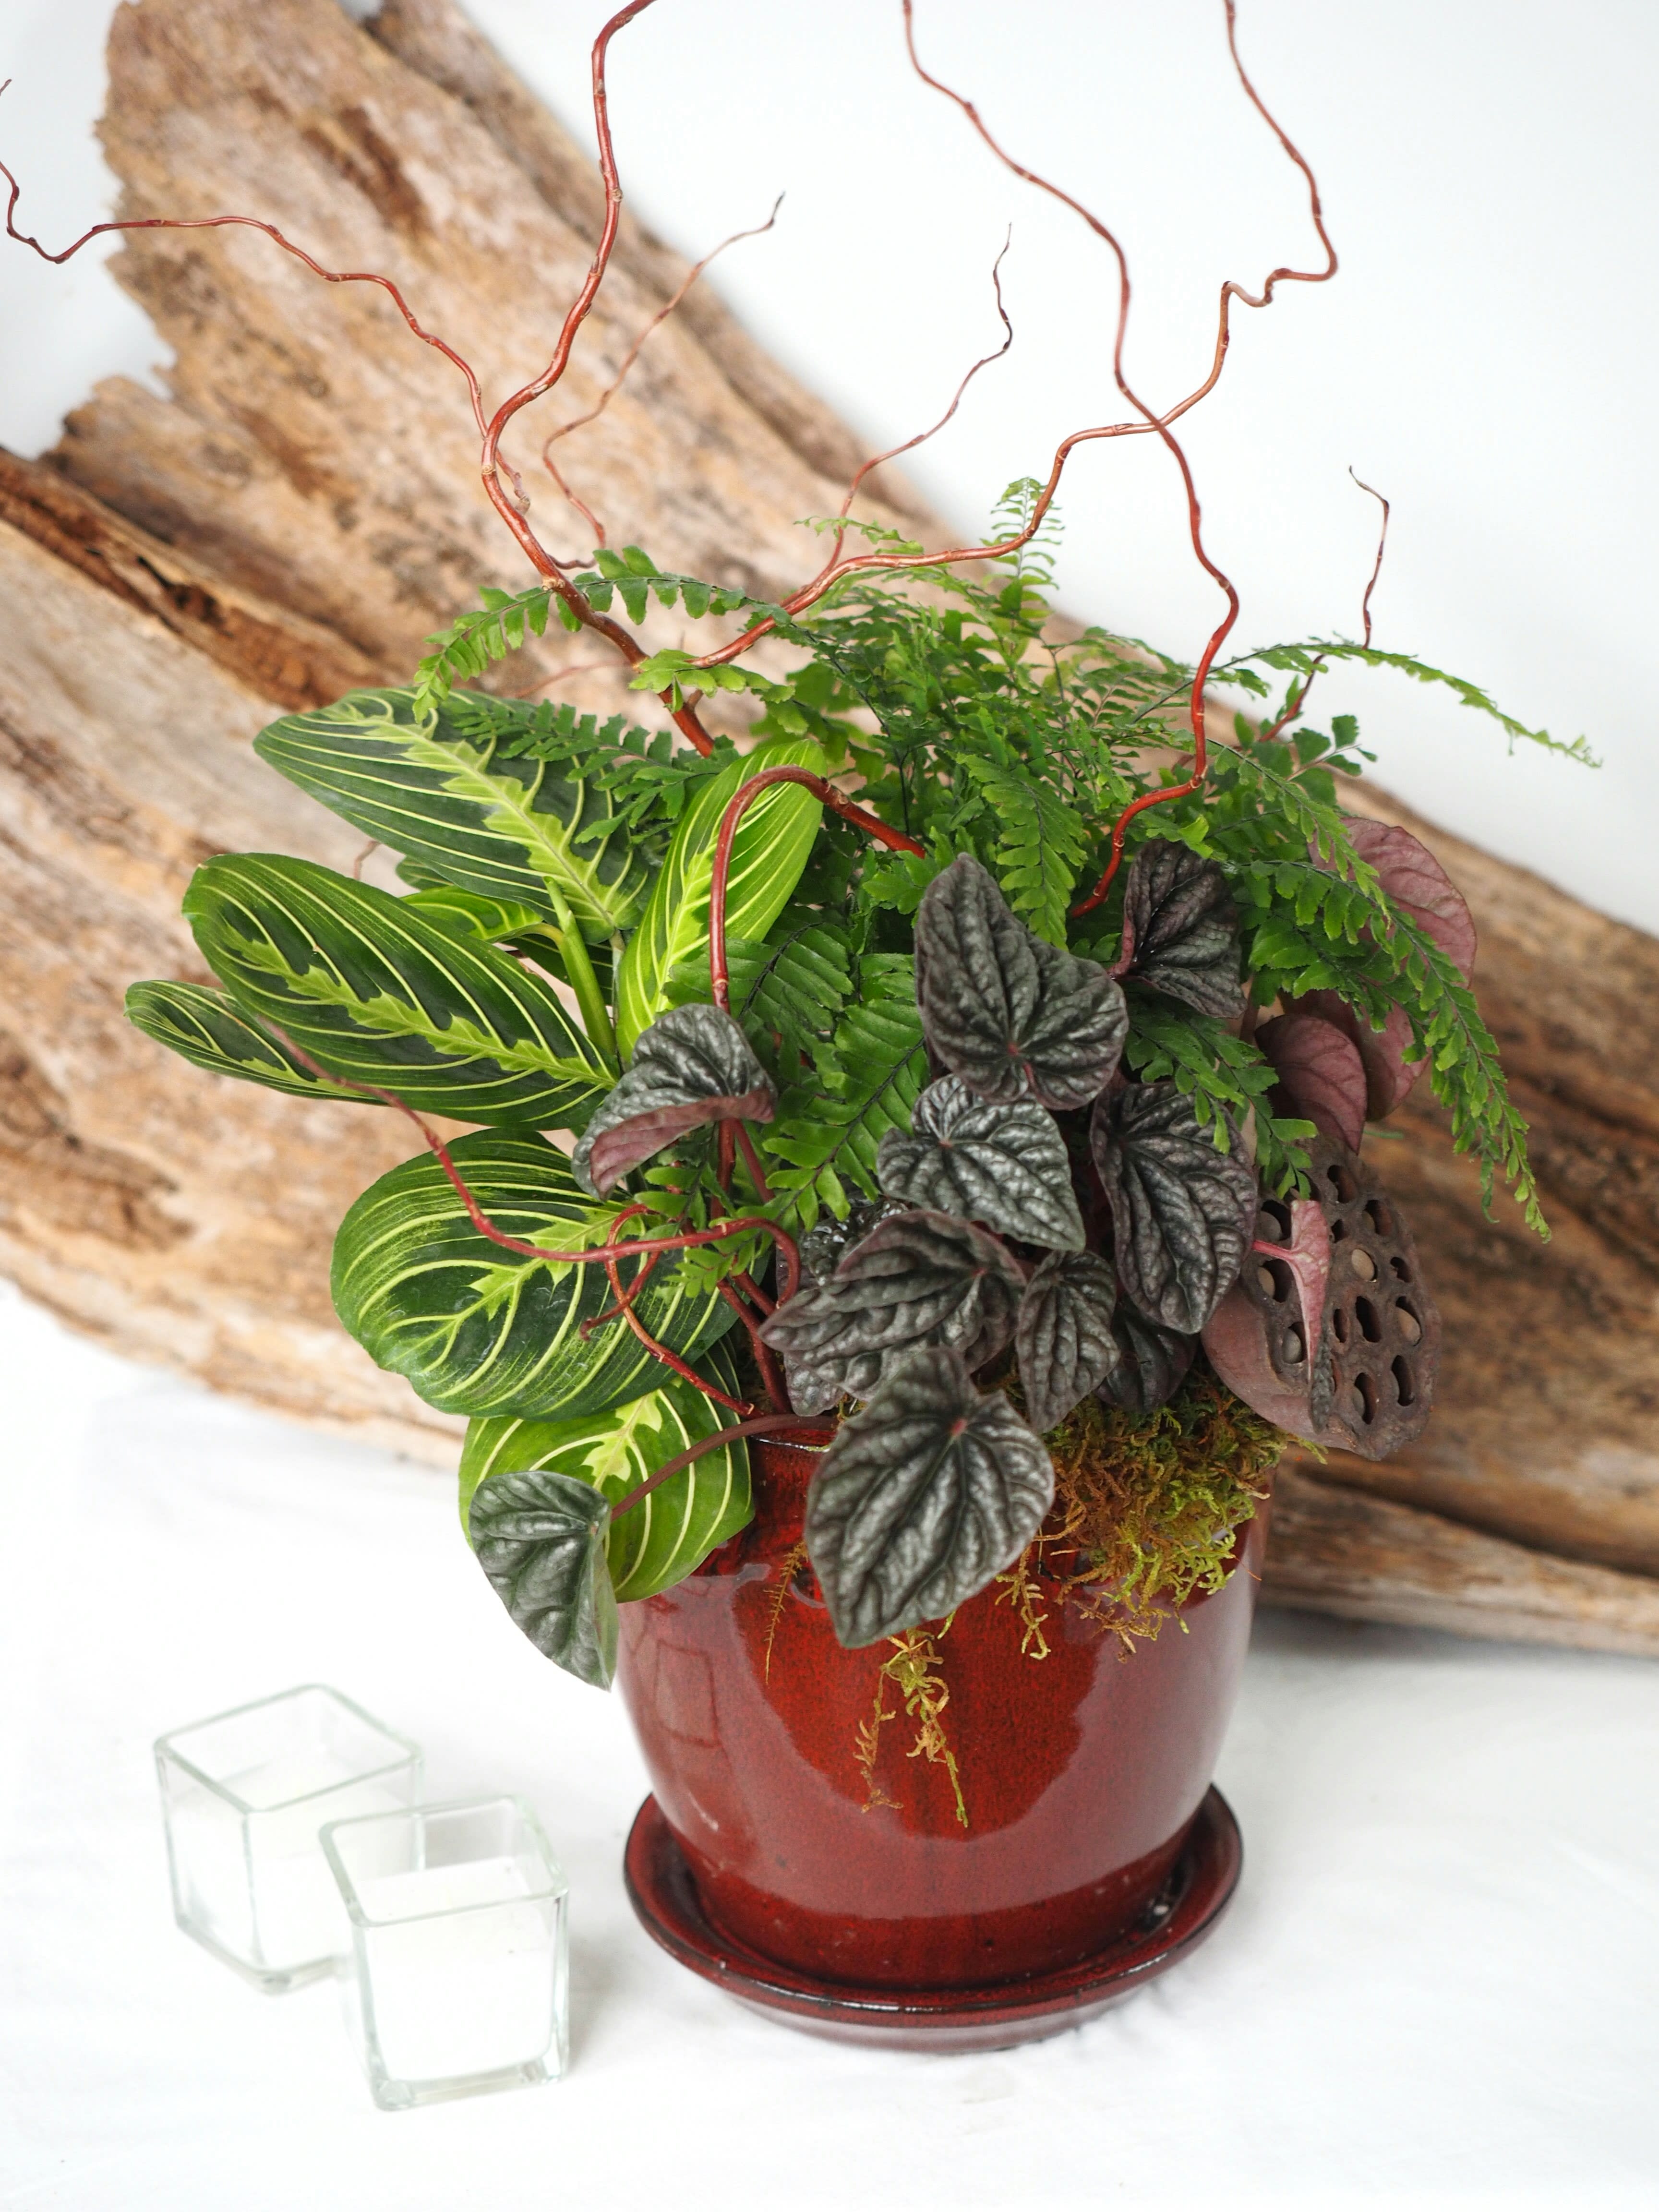 Adrian  - A trio of low to medium light tropical plants with decorative finishes of curly willow, fresh green sheet moss, and a dried lotus pod. Planted in a glazed ceramic pot with attached saucer.  Every planter is delivered with care instructions. 